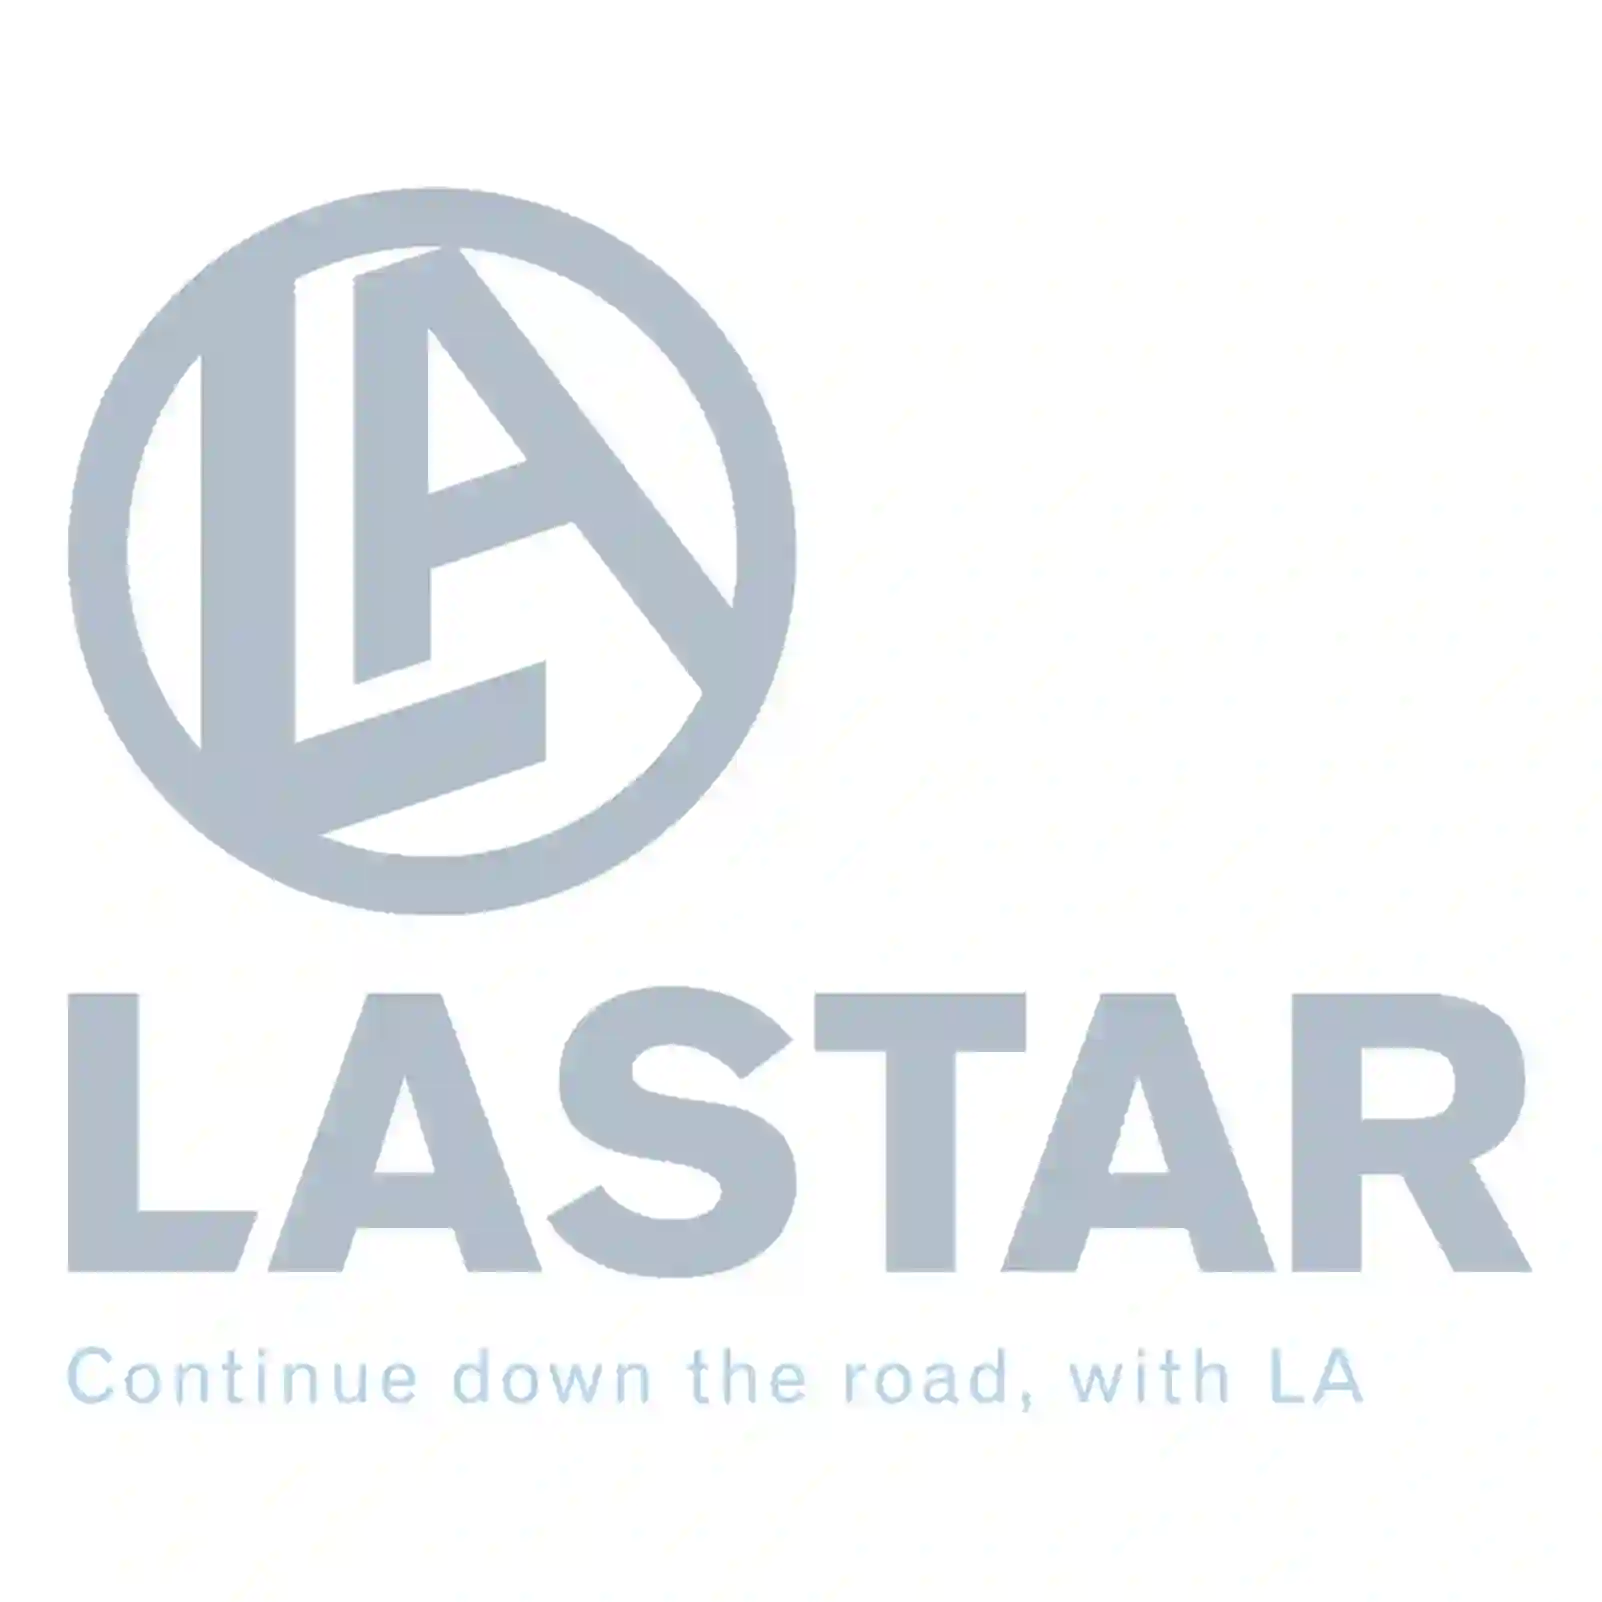  Wheel bearing unit, without accessories || Lastar Spare Part | Truck Spare Parts, Auotomotive Spare Parts